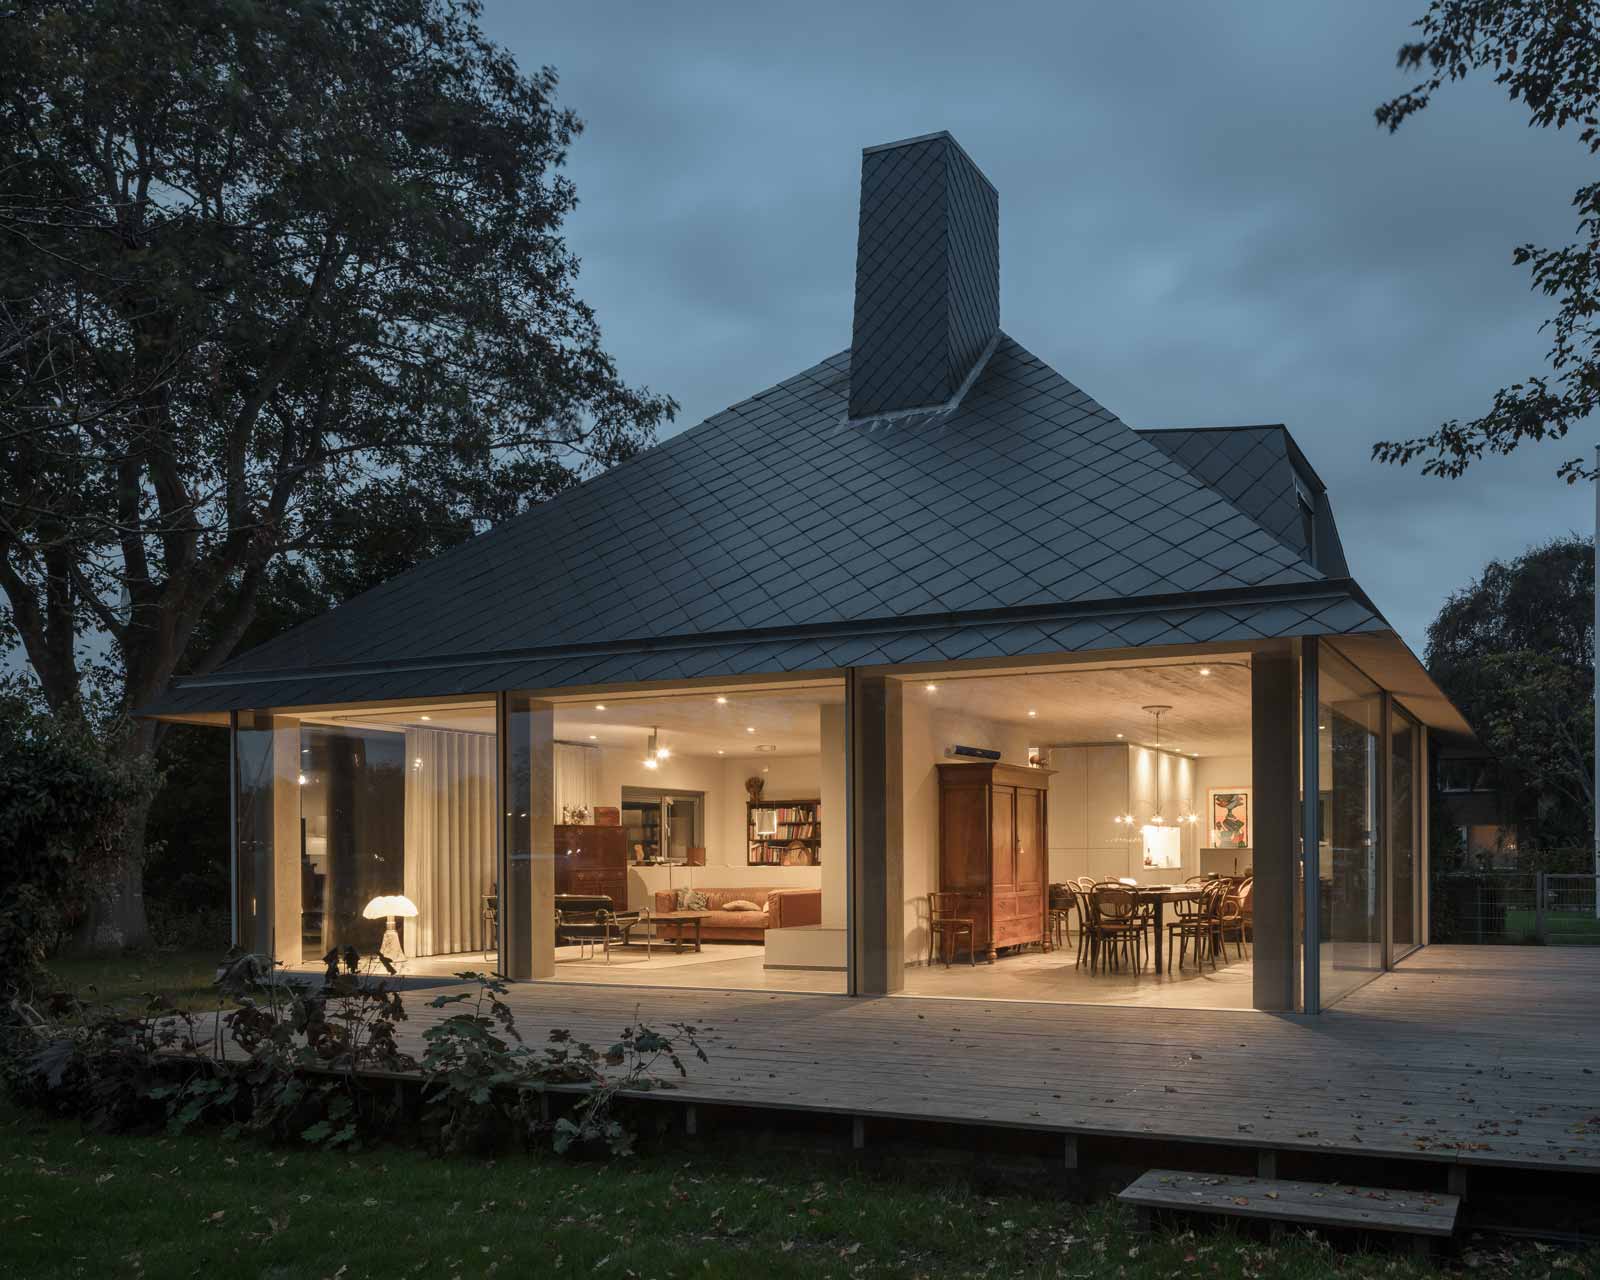 exterior night photo of house tc showing building as a whole by beta architect amsterdam evert klinkenberg gus auguste van oppen image by Stijn Bollaert